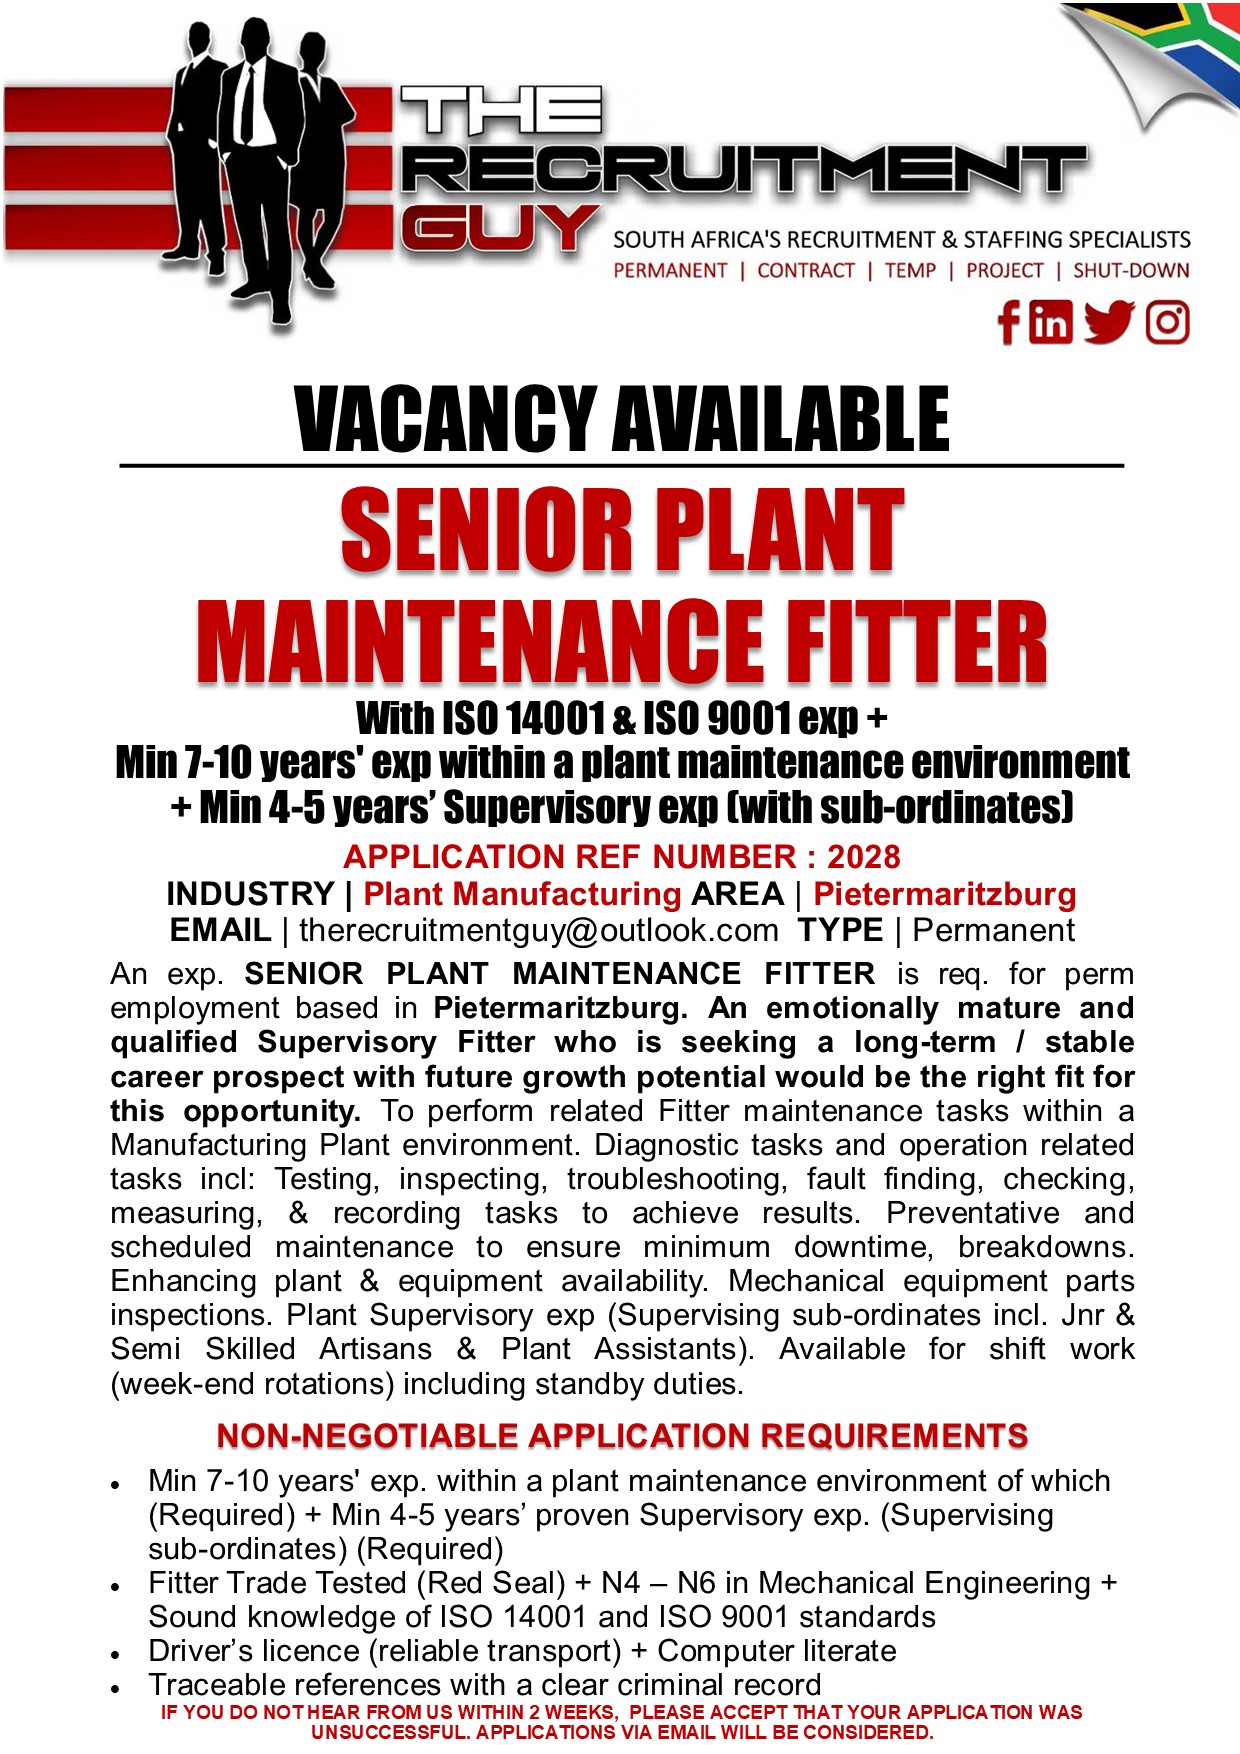 GN SOUTH AFRICA'S RECRUITMENT & STAFFING SPECIALISTS

PERMANENT | CONTRACT | TEMP | PROJECT | SHUT-DOWN

{ink JG]

VACANCY AVAILABLE

SENIOR PLANT
MAINTENANCE FITTER

With ISO 14001 & ISO 9001 exp +
Min 7-10 years' exp within à plant maintenance environment
+ Min 4-5 years’ Supervisory exp (with sub-ordinates)
APPLICATION REF NUMBER : 2028

INDUSTRY | Plant Manufacturing AREA | Pietermaritzburg
EMAIL | therecruitmentguy@outlook.com TYPE | Permanent

An exp. SENIOR PLANT MAINTENANCE FITTER is req. for perm
employment based in Pietermaritzburg. An emotionally mature and
qualified Supervisory Fitter who is seeking a long-term / stable
career prospect with future growth potential would be the right fit for
this opportunity. To perform related Fitter maintenance tasks within a
Manufacturing Plant environment. Diagnostic tasks and operation related
tasks incl: Testing, inspecting, troubleshooting, fault finding, checking,
measuring, & recording tasks to achieve results. Preventative and
scheduled maintenance to ensure minimum downtime, breakdowns.
Enhancing plant & equipment availability. Mechanical equipment parts
inspections. Plant Supervisory exp (Supervising sub-ordinates incl. Jnr &
Semi Skilled Artisans & Plant Assistants). Available for shift work
(week-end rotations) including standby duties.

NON-NEGOTIABLE APPLICATION REQUIREMENTS

« Min 7-10 years' exp. within a plant maintenance environment of which
(Required) + Min 4-5 years’ proven Supervisory exp. (Supervising
sub-ordinates) (Required)

« Fitter Trade Tested (Red Seal) + N4 — N6 in Mechanical Engineering +
Sound knowledge of ISO 14001 and ISO 9001 standards

+ Driver's licence (reliable transport) + Computer literate

« Traceable references with a clear criminal record
IF YOU DO NOTHEAR FROM US WITHIN 2 WEEKS, PLEASE ACCEPT THAT YOUR APPLICATION WAS
UNSUCCESSFUL. APPLICATIONS VIA EMAIL WILL BE CONSIDERED.